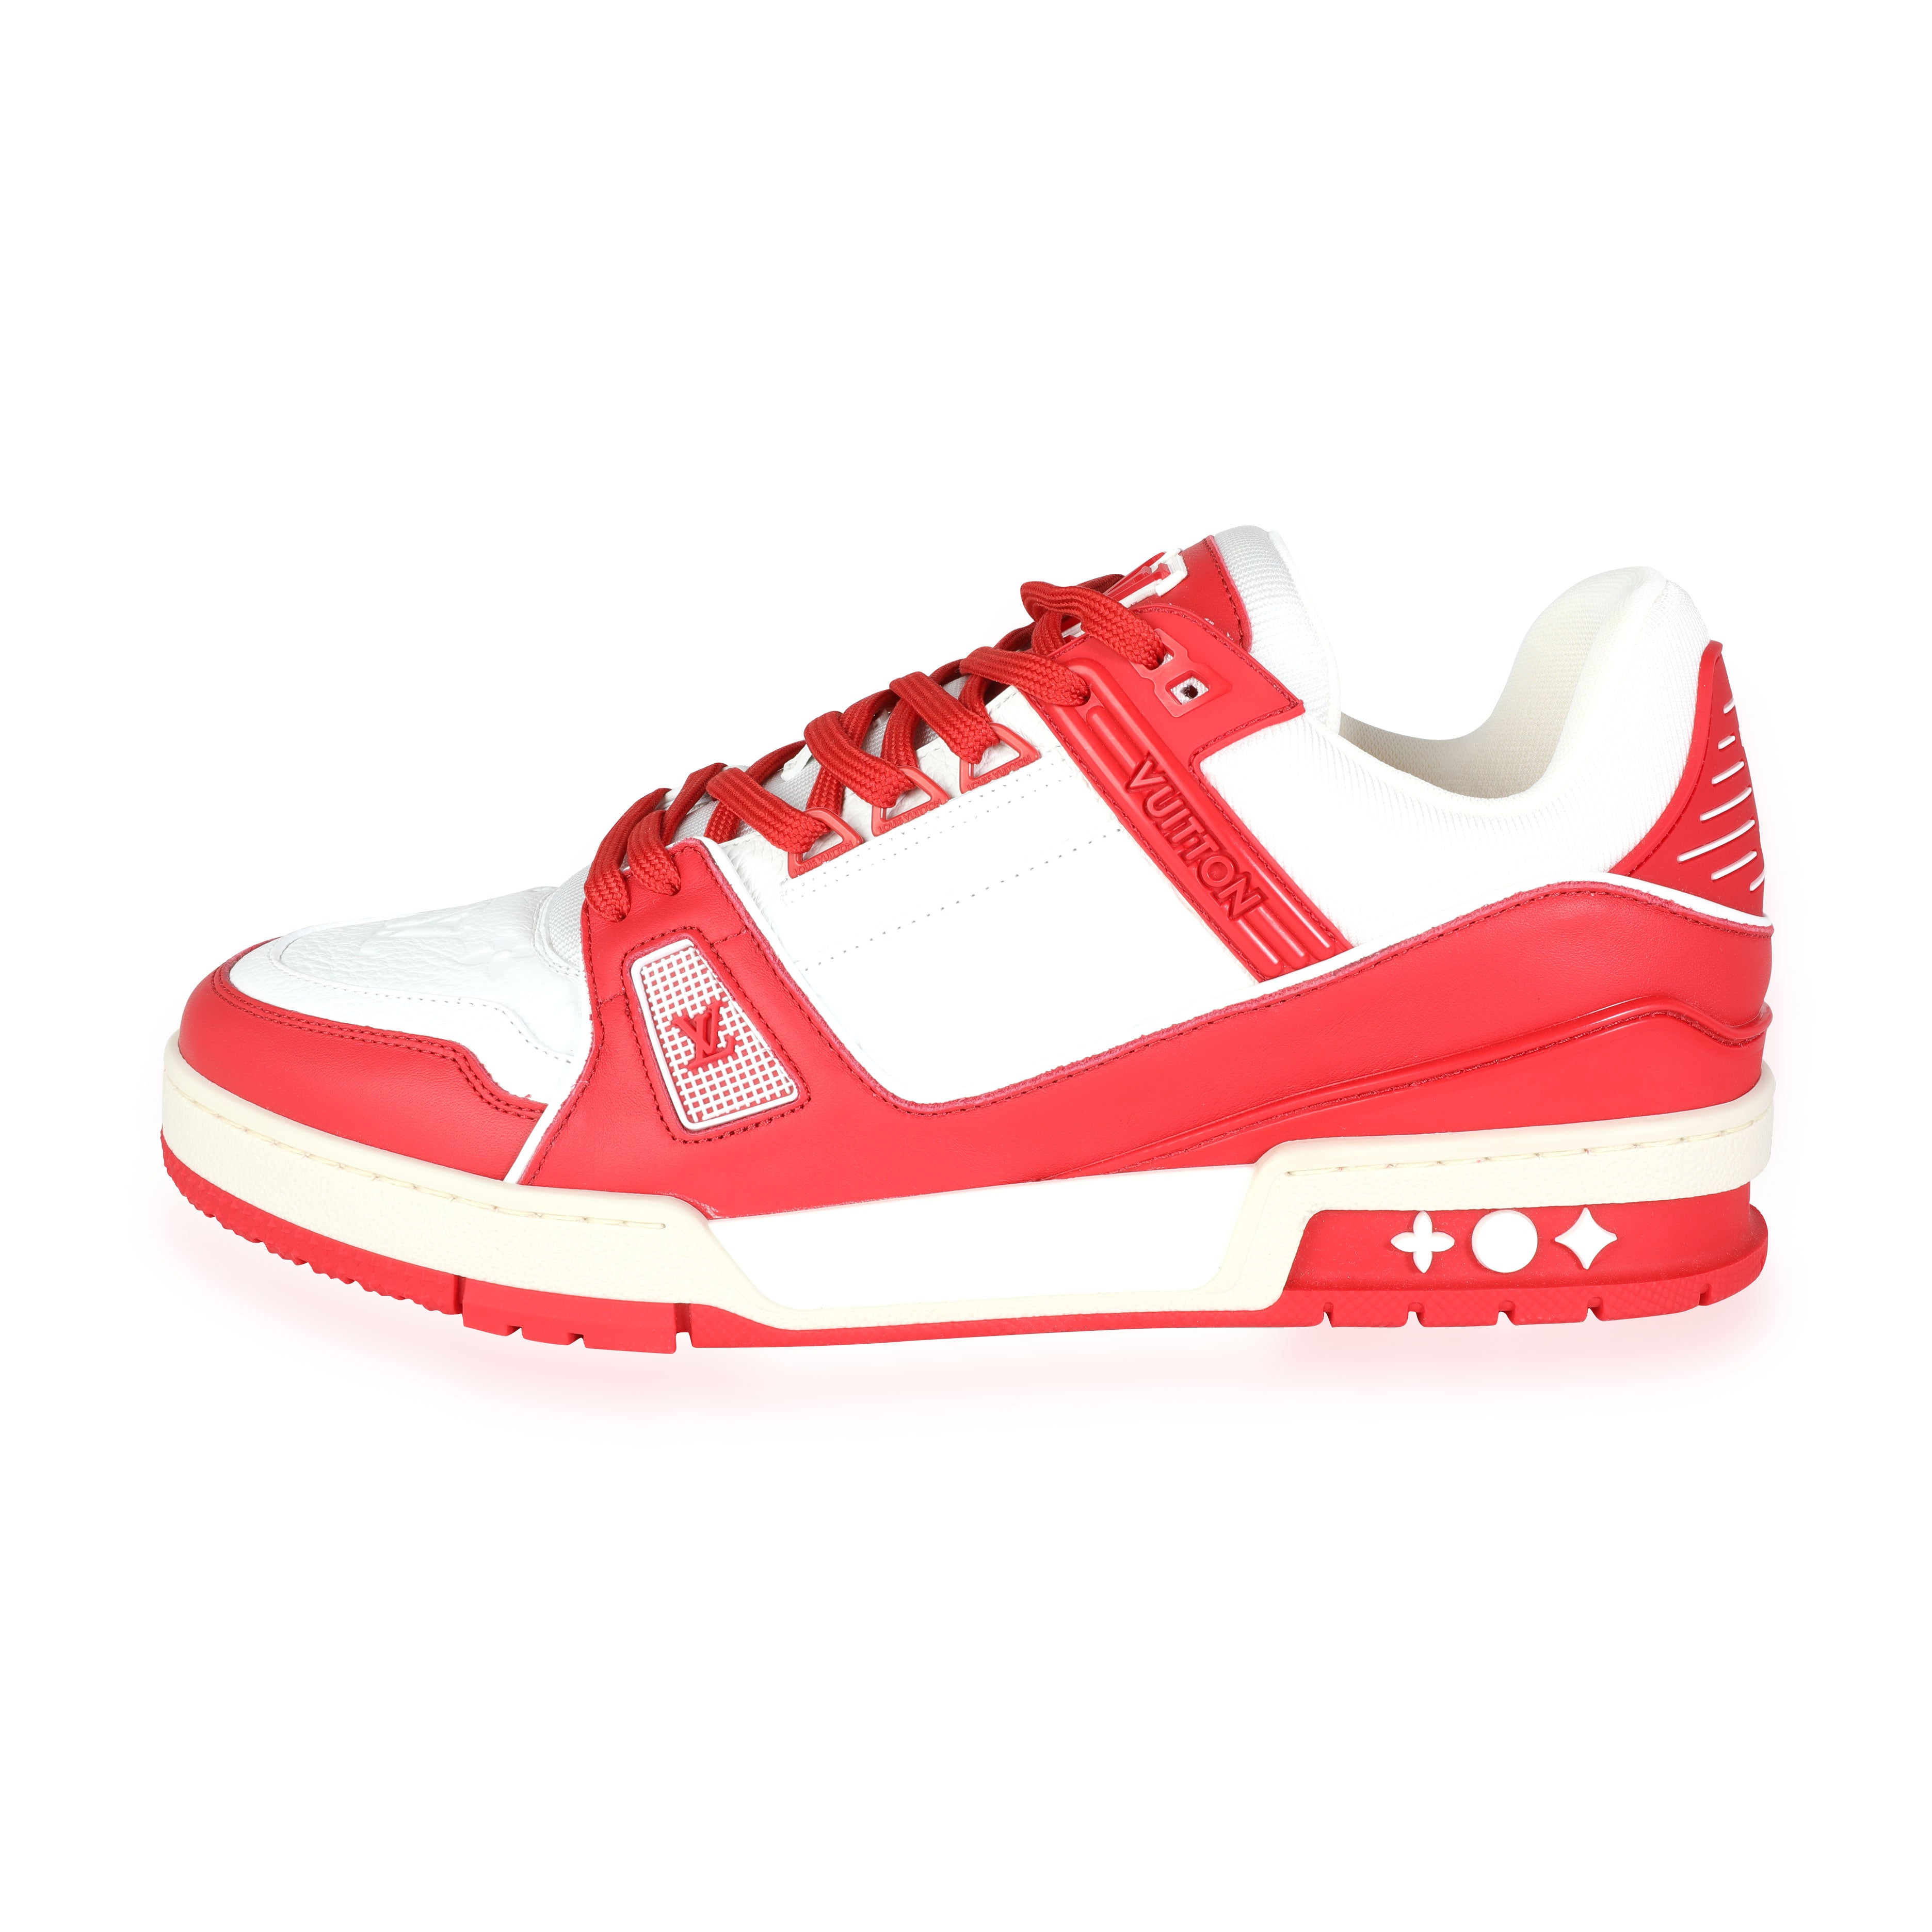 Louis Vuitton - Product (RED) x Louis Vuitton Trainer 'Red' (9 UK